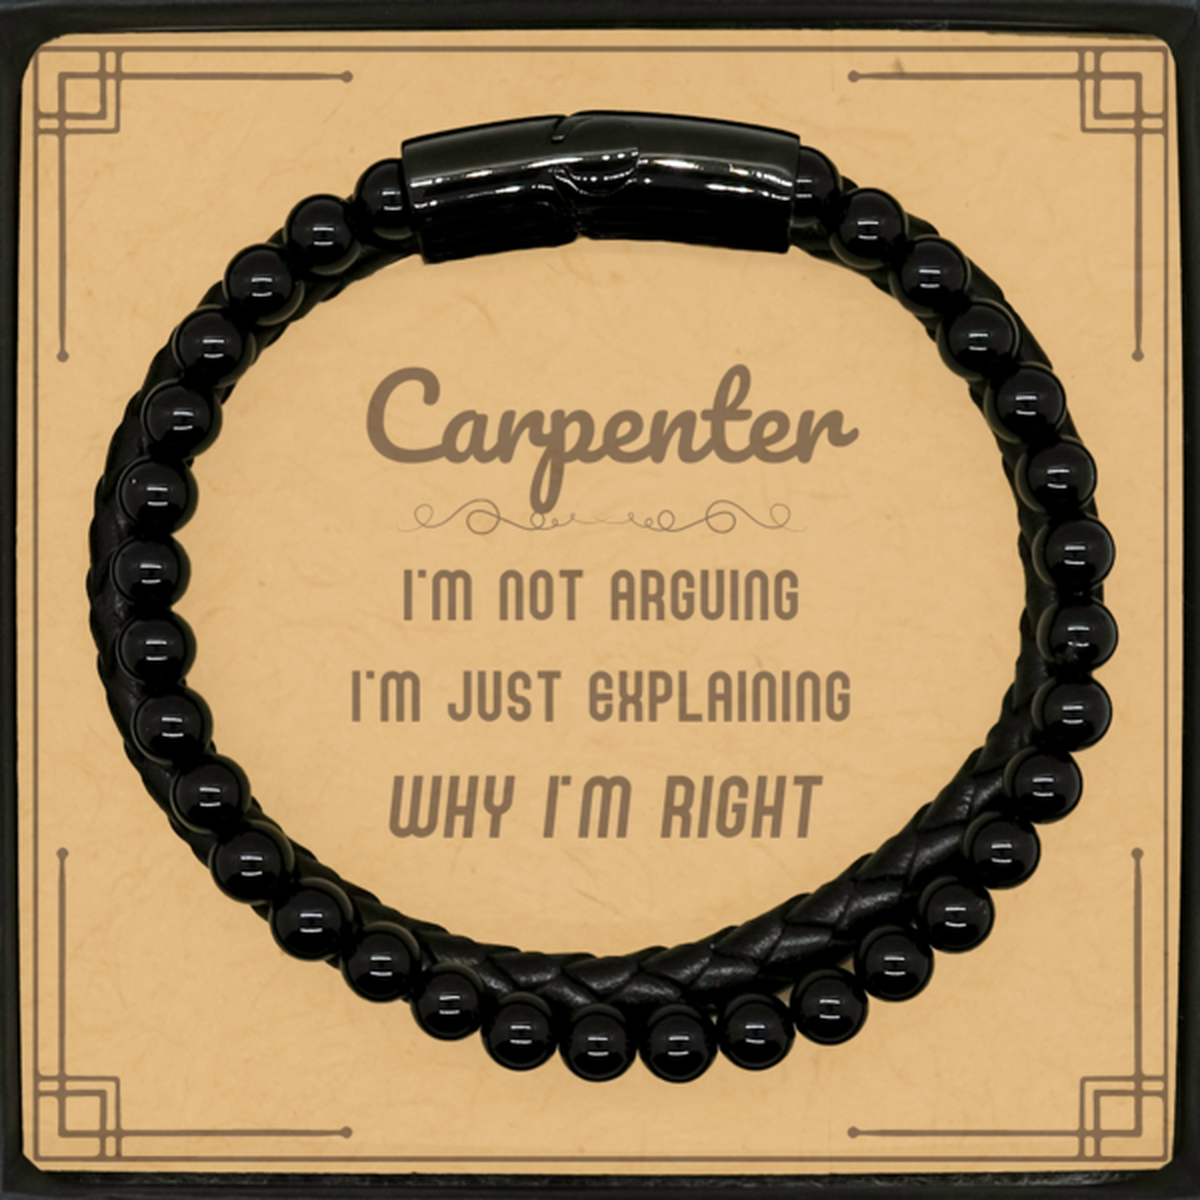 Carpenter I'm not Arguing. I'm Just Explaining Why I'm RIGHT Stone Leather Bracelets, Funny Saying Quote Carpenter Gifts For Carpenter Message Card Graduation Birthday Christmas Gifts for Men Women Coworker